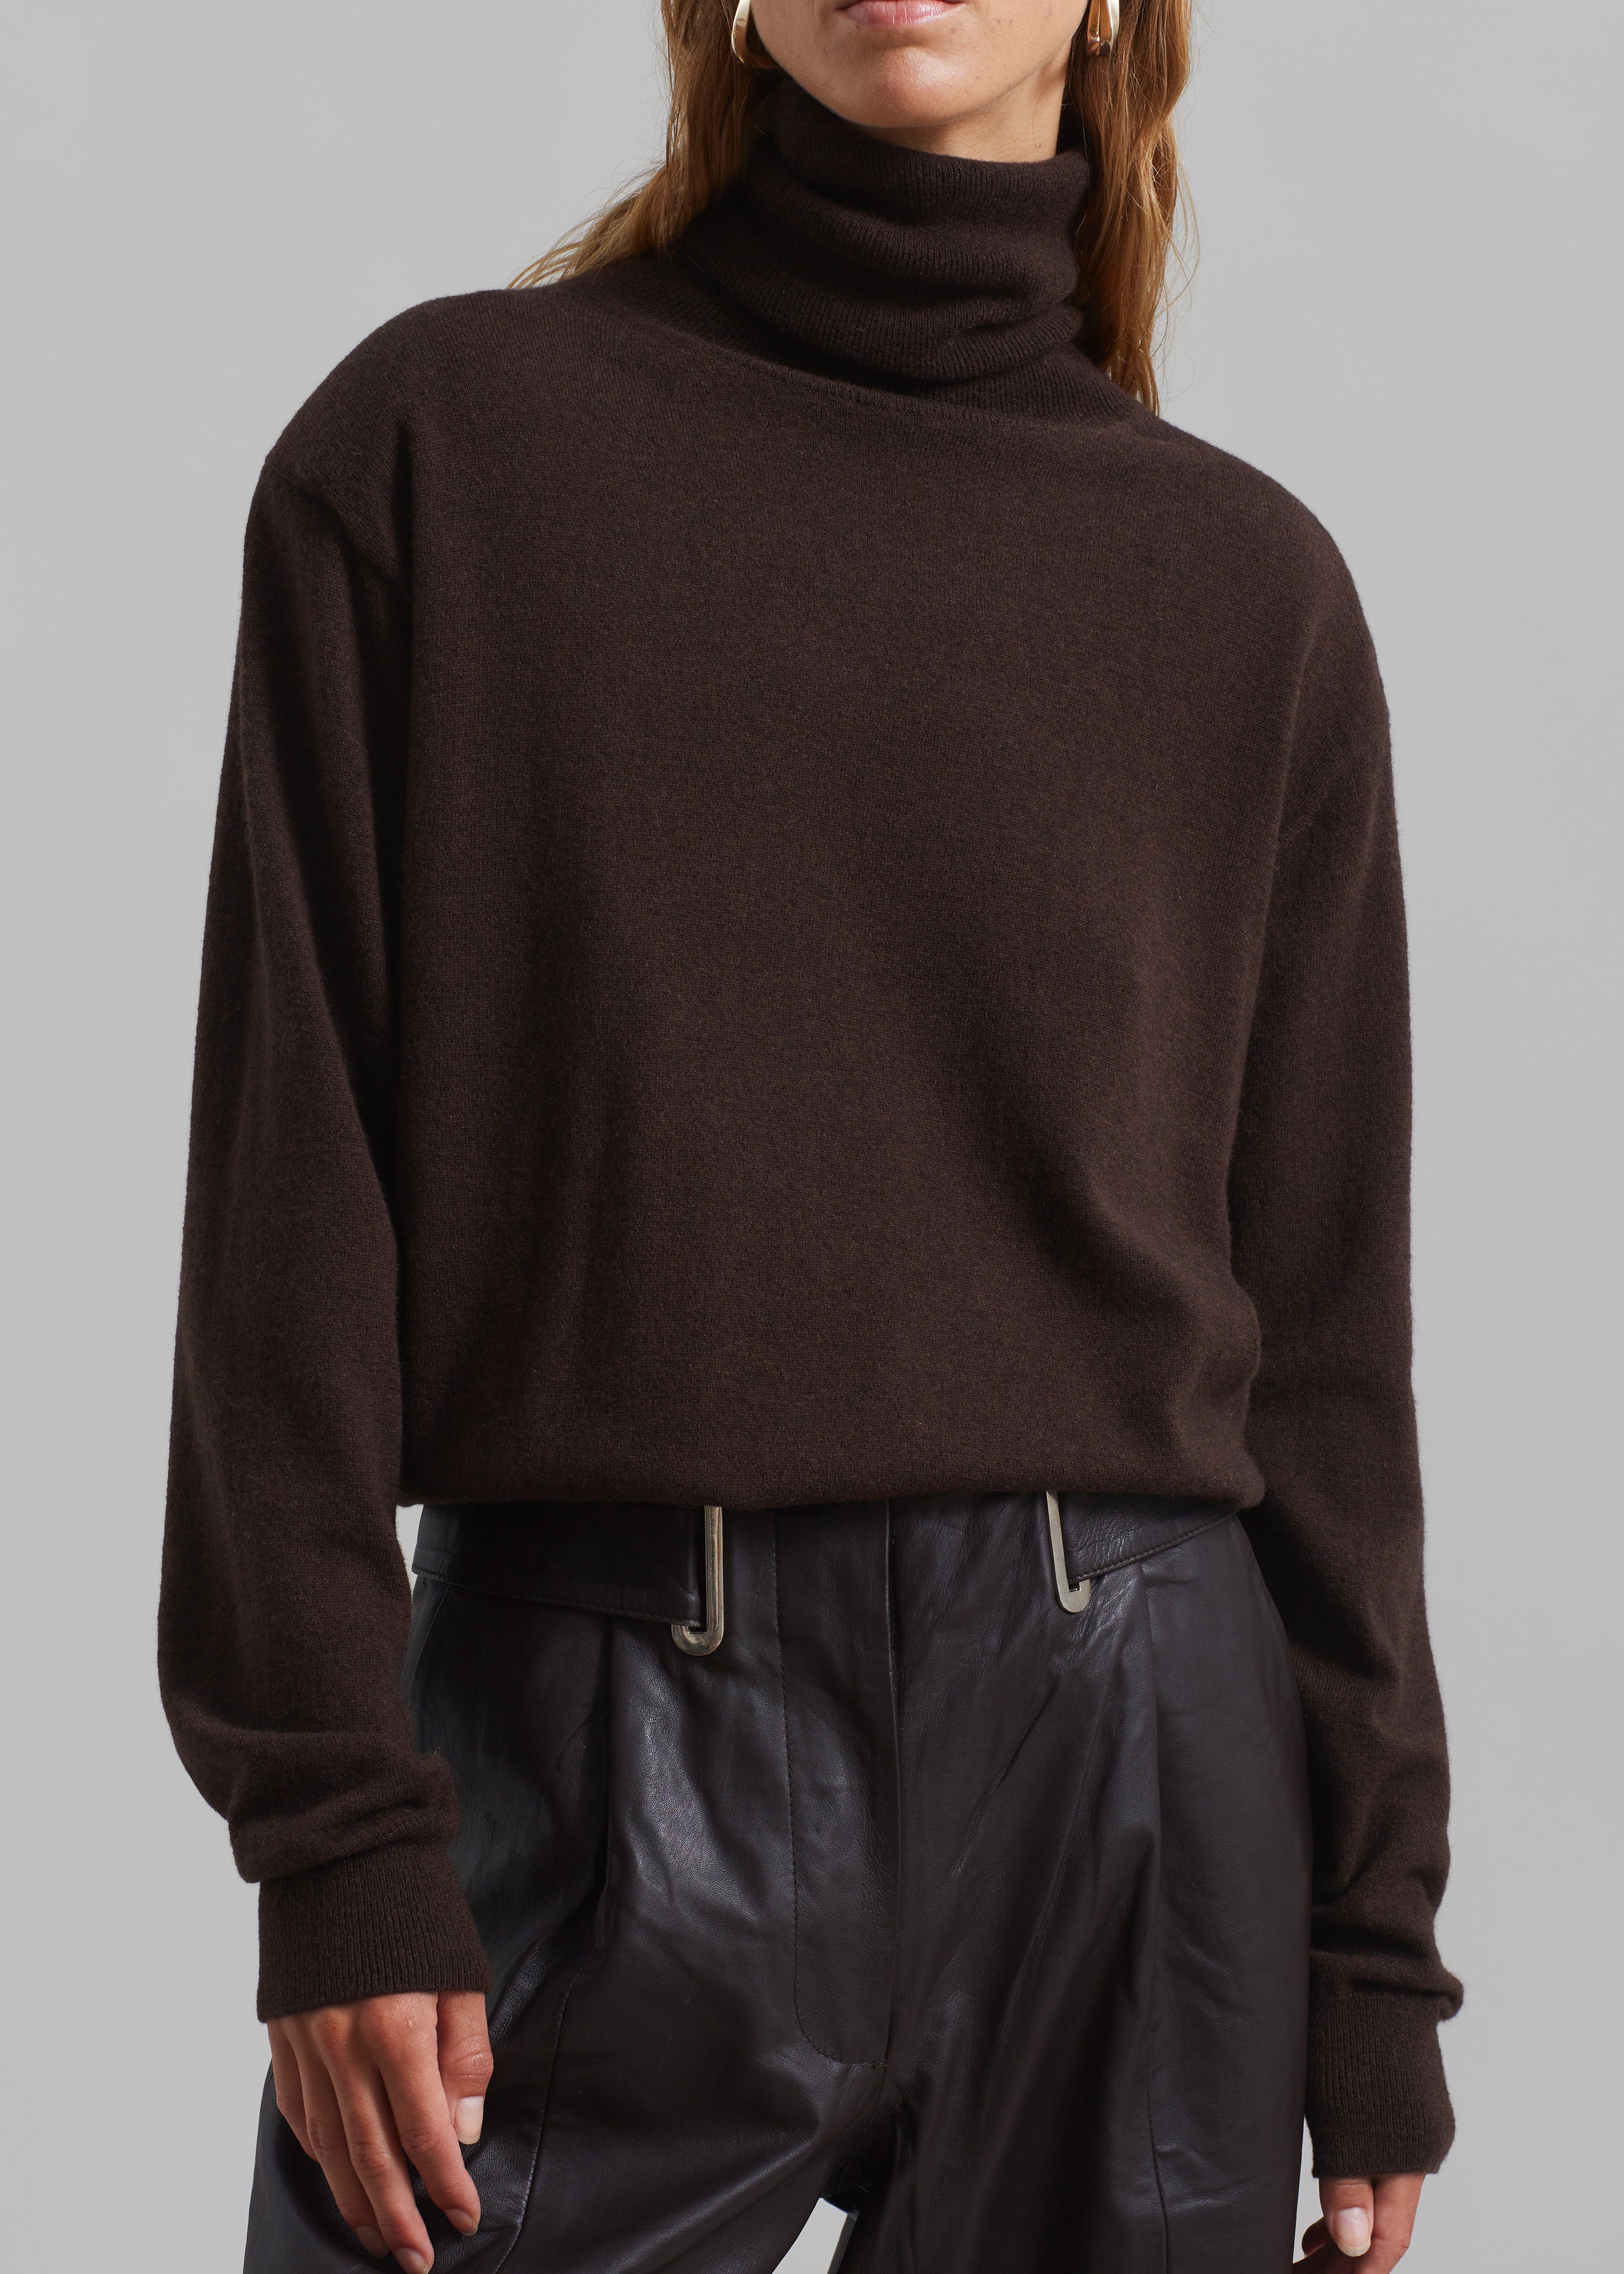 Ines Thin Padded Turtleneck - Brown - 5